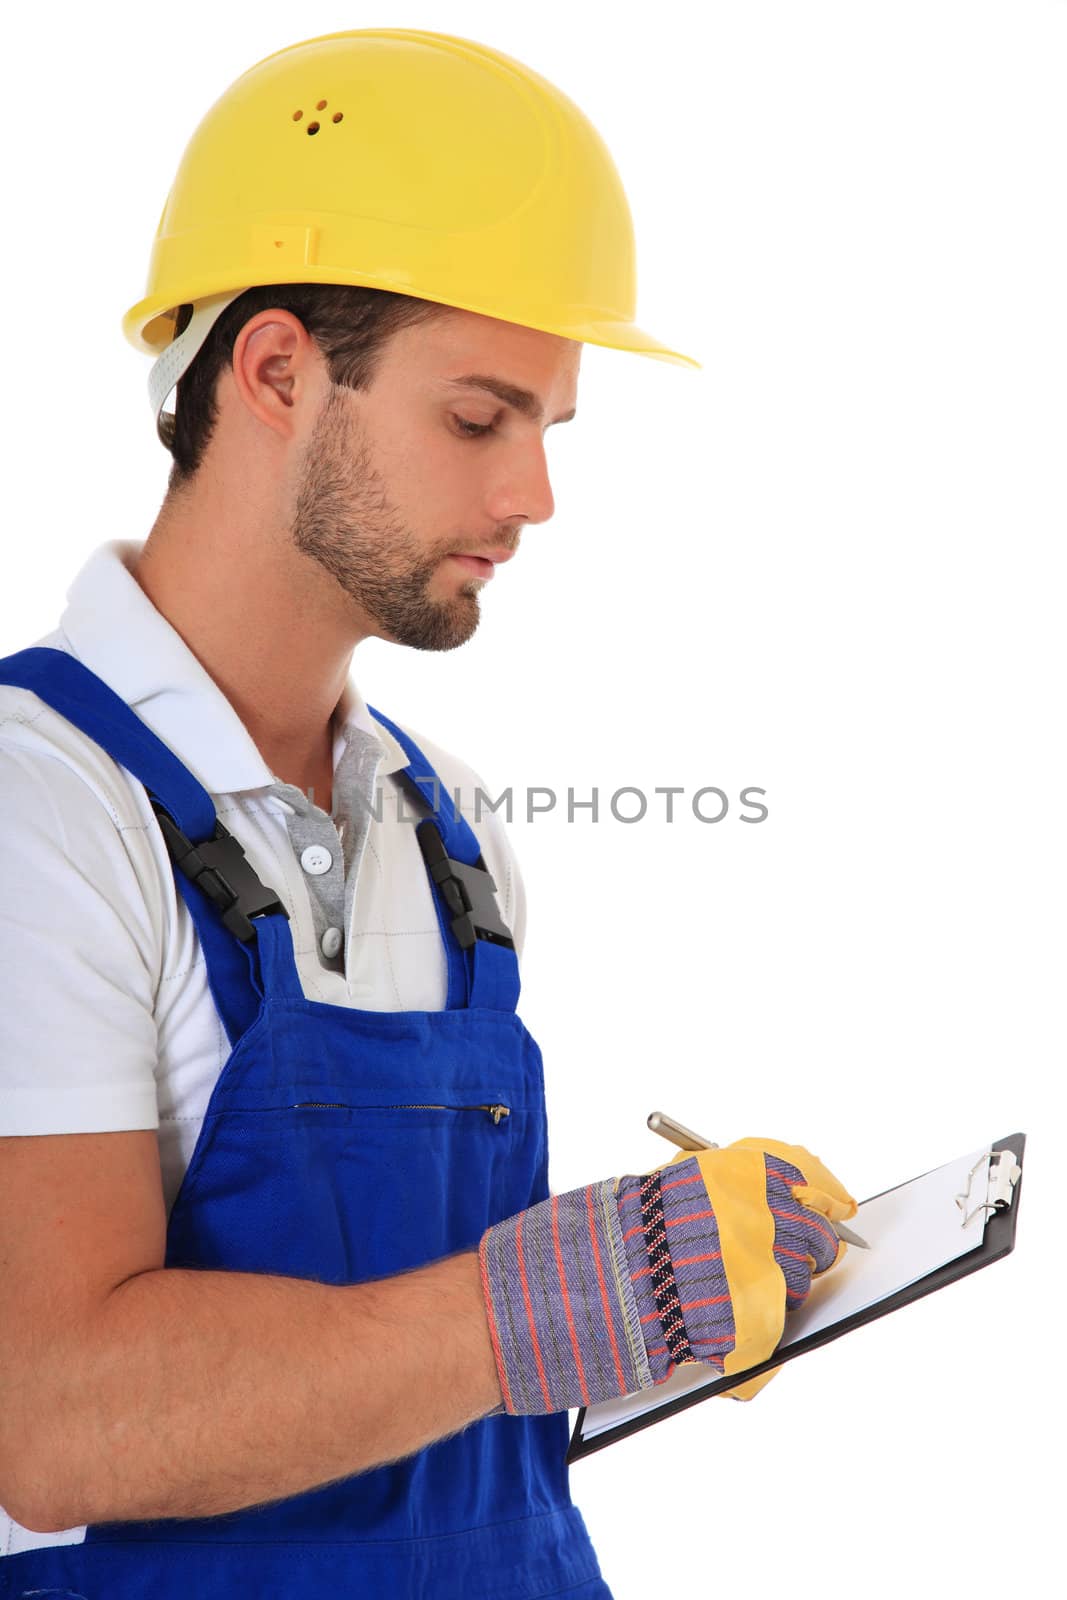 Construction worker writing on clipboard. All on white background.